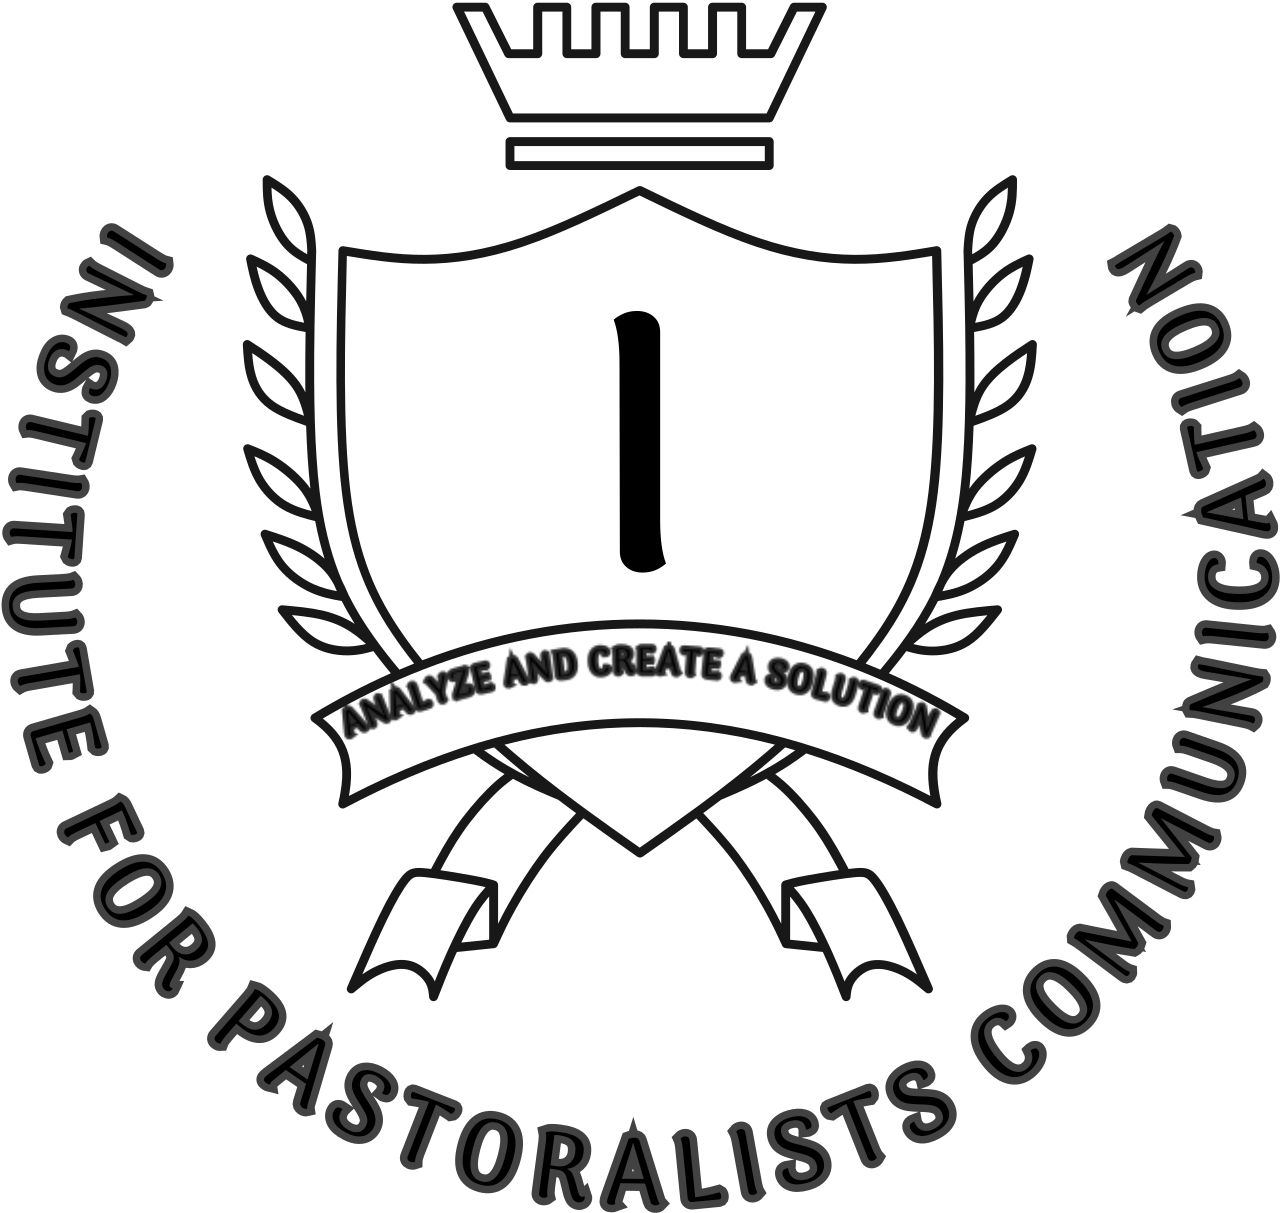 INSTITUTE FOR PASTORALISTS COMMUNICATION's web page